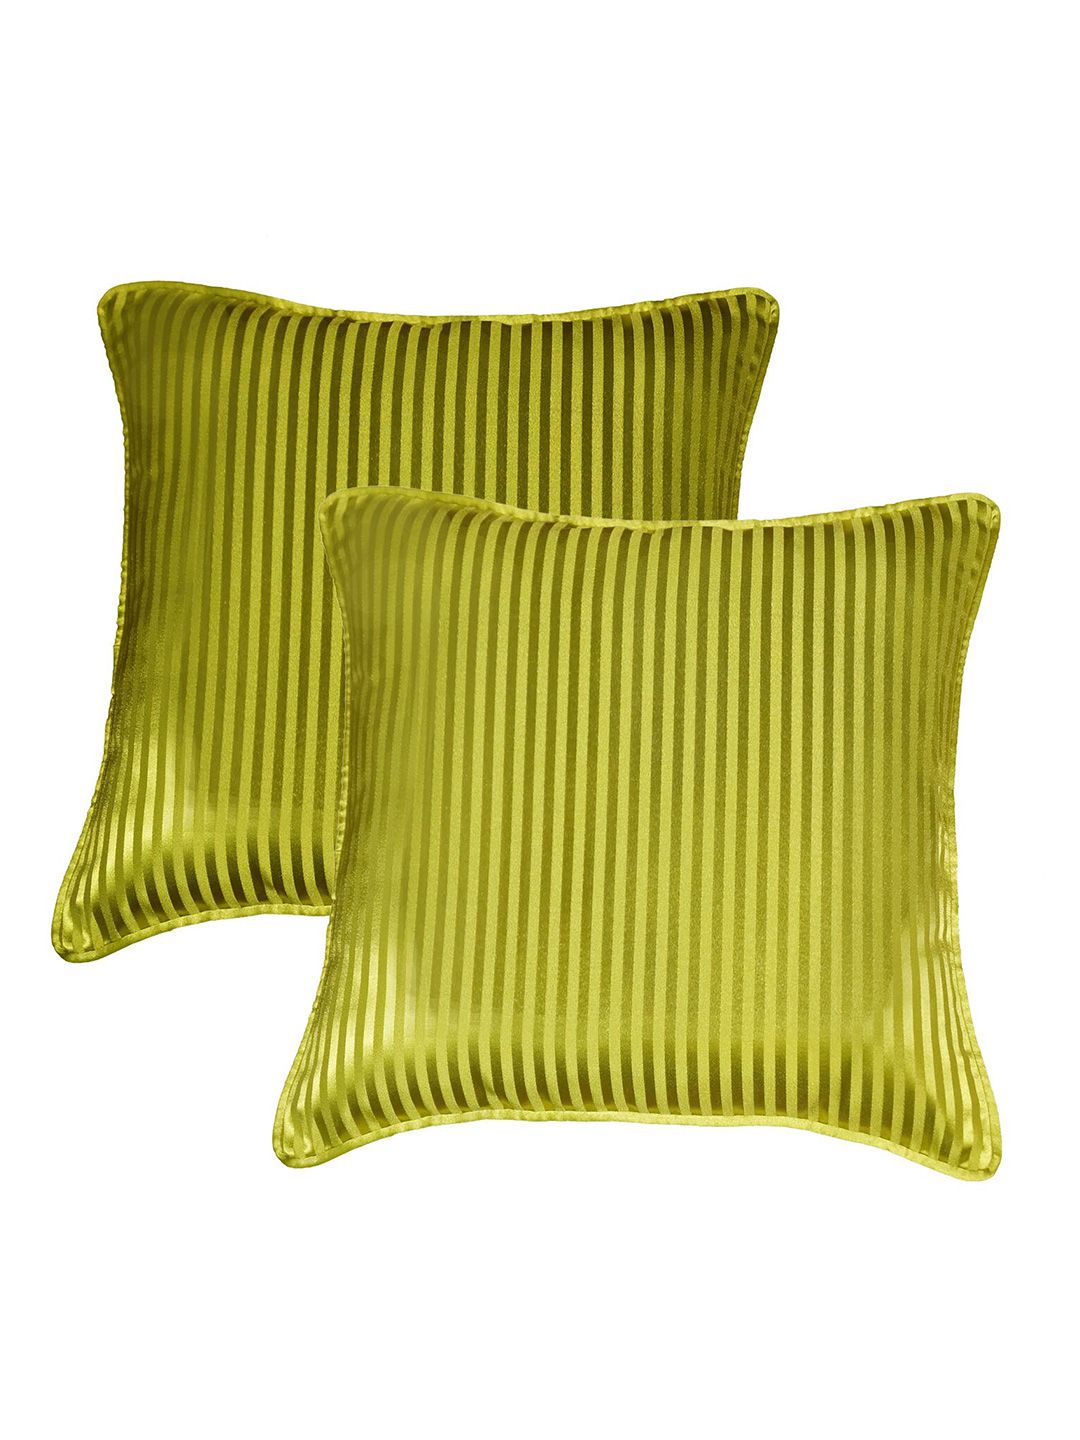 Lushomes Yellow Set of 2 Striped Square Cushion Covers Price in India